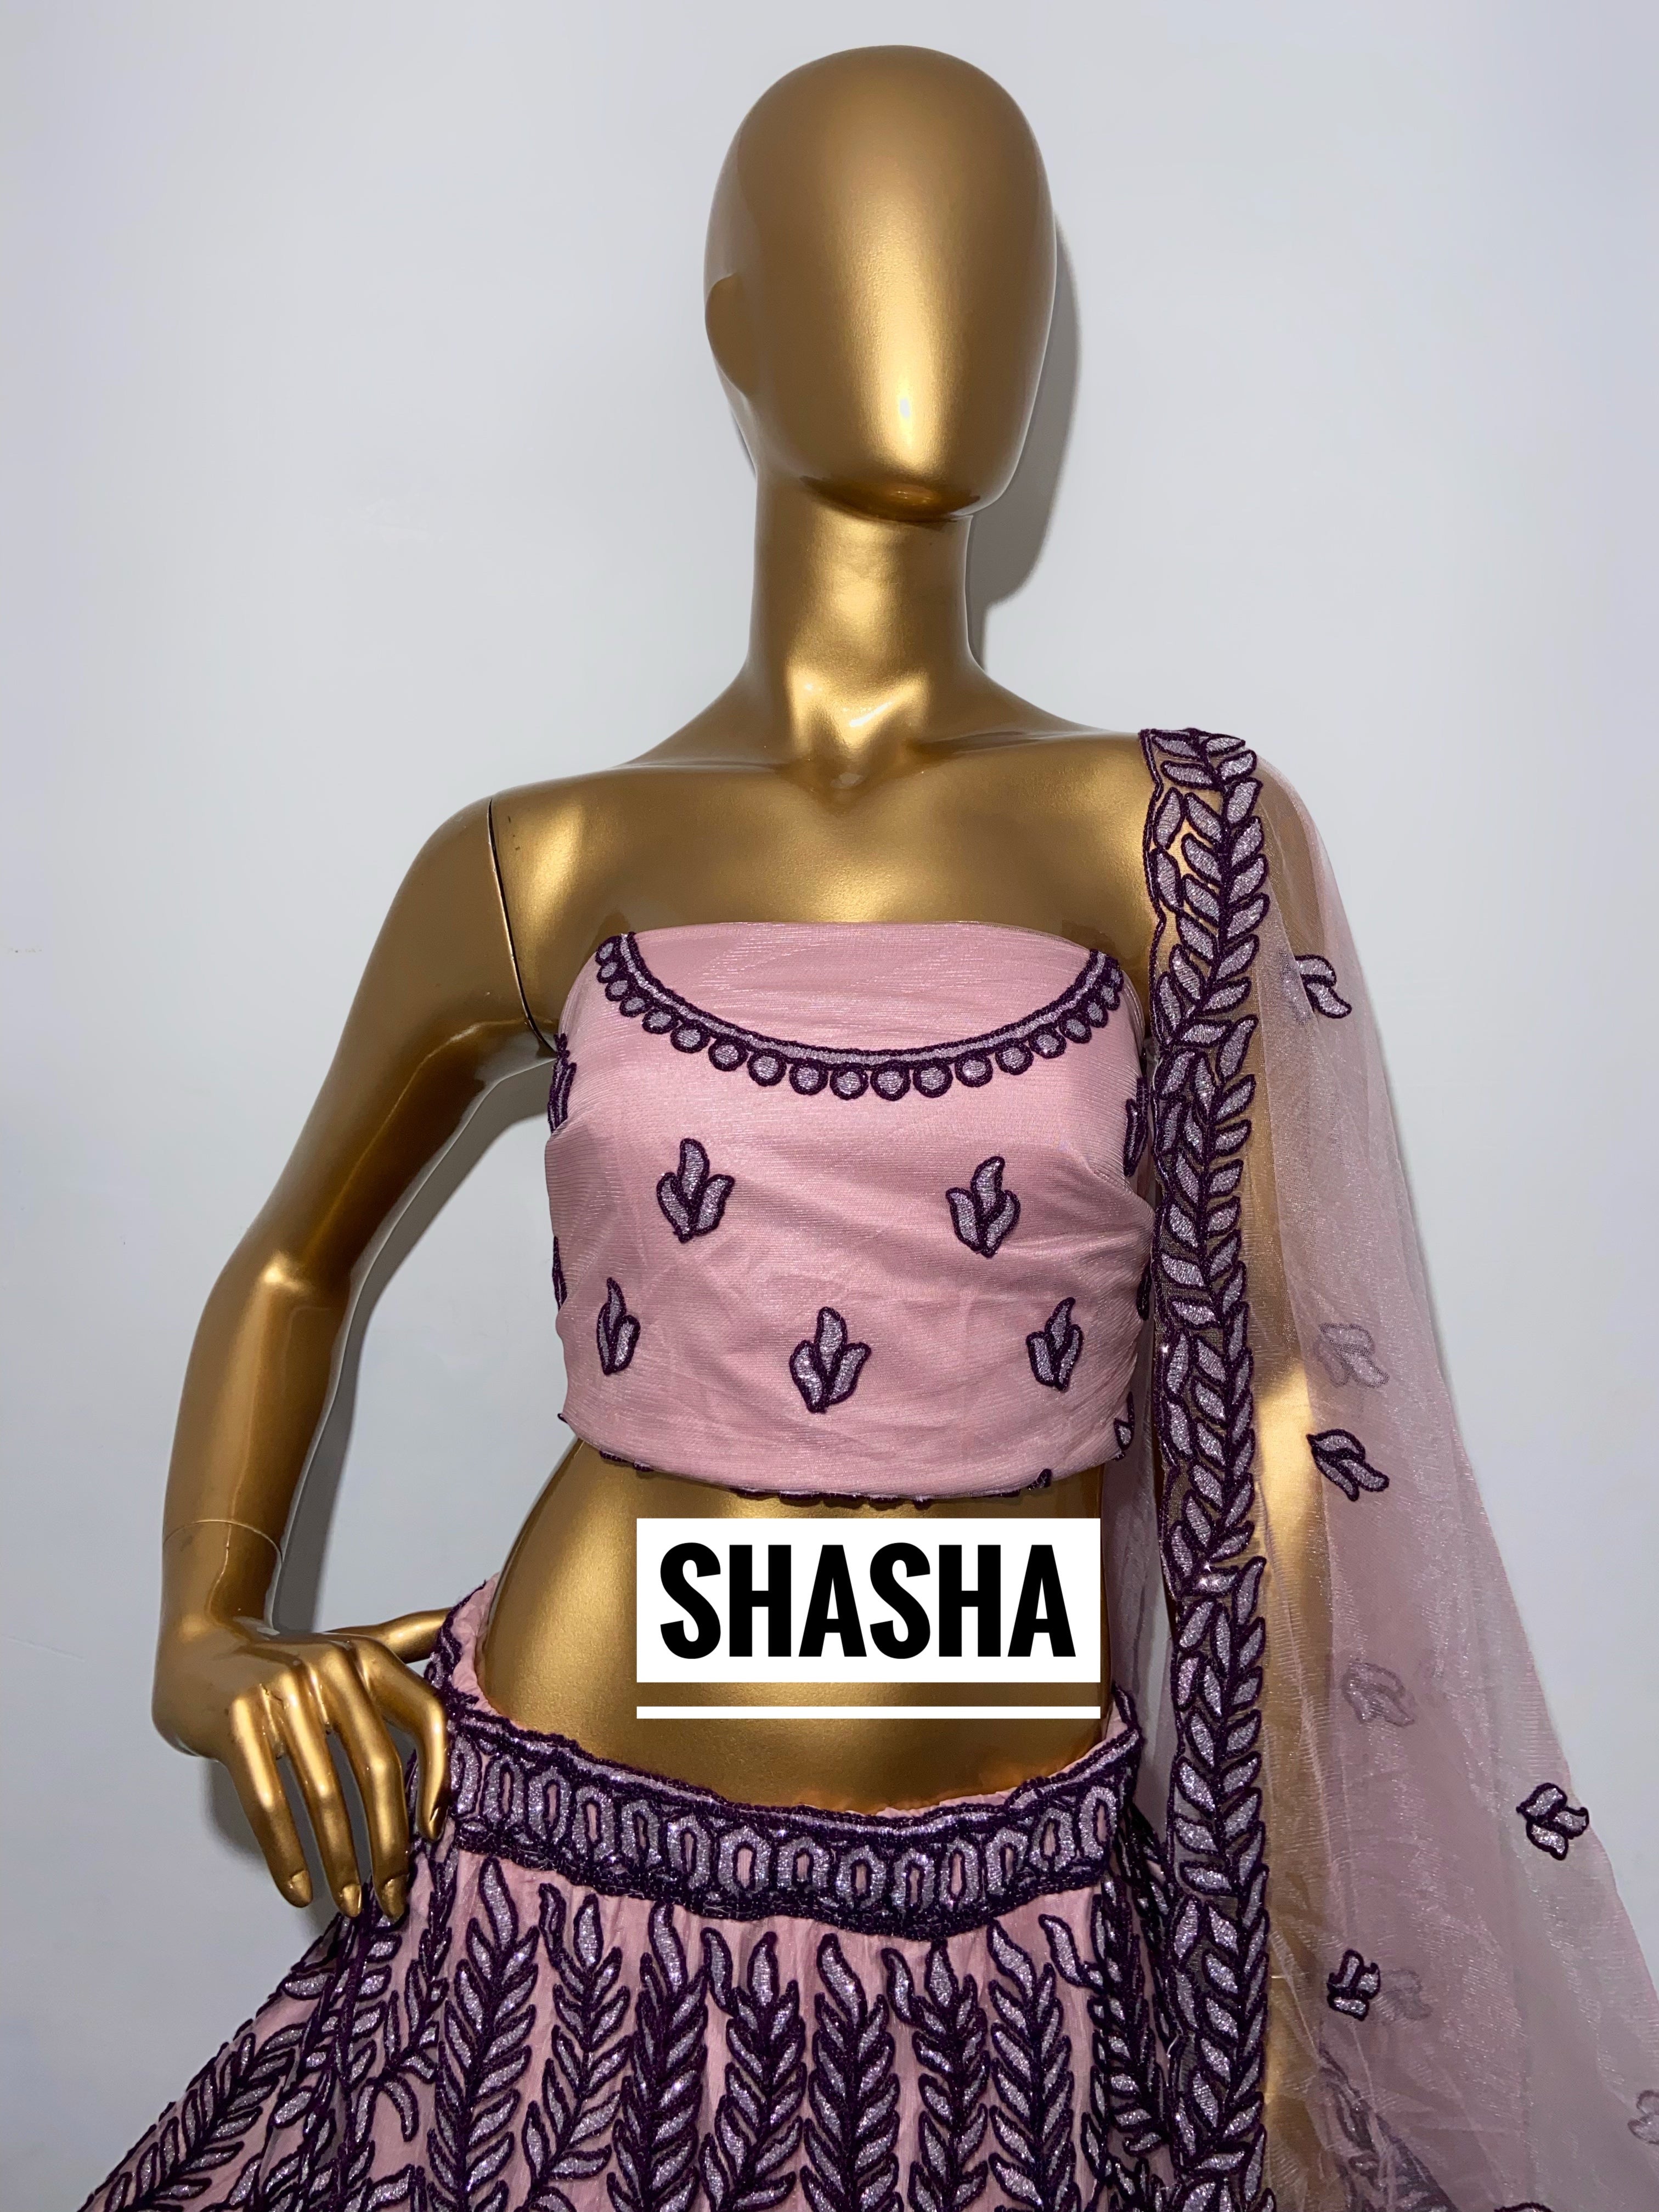 Shasha's Contemporary, Classy and Eclectic Collections. For Modern and  Independent Urban Woman